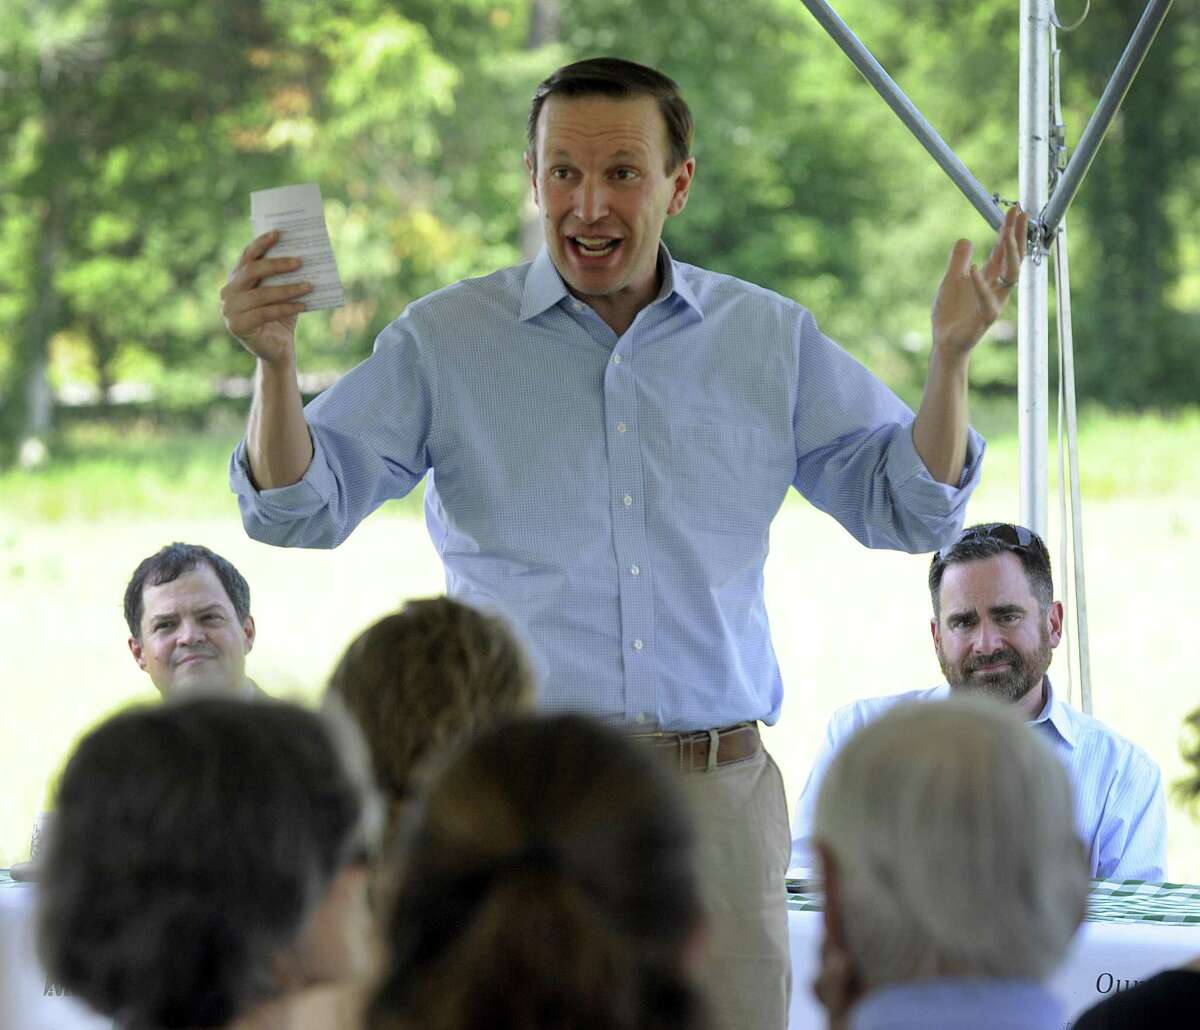 U.S. Sen. Chris Murphy speaks Friday at a gathering to celebrate the Highlands Conservation Act. Left is Tim Abbott, Regional Land Conservation director and right is Robert Klee, DEEP commissioner for the state. Several conservation groups are hosted U.S. Sen. Chris Murphy in Kent Friday, July 13, 2018, to celebrate the Highlands Conservation Act, which is one of the most important sources of federal land protection funding in Northwest Connecticut.